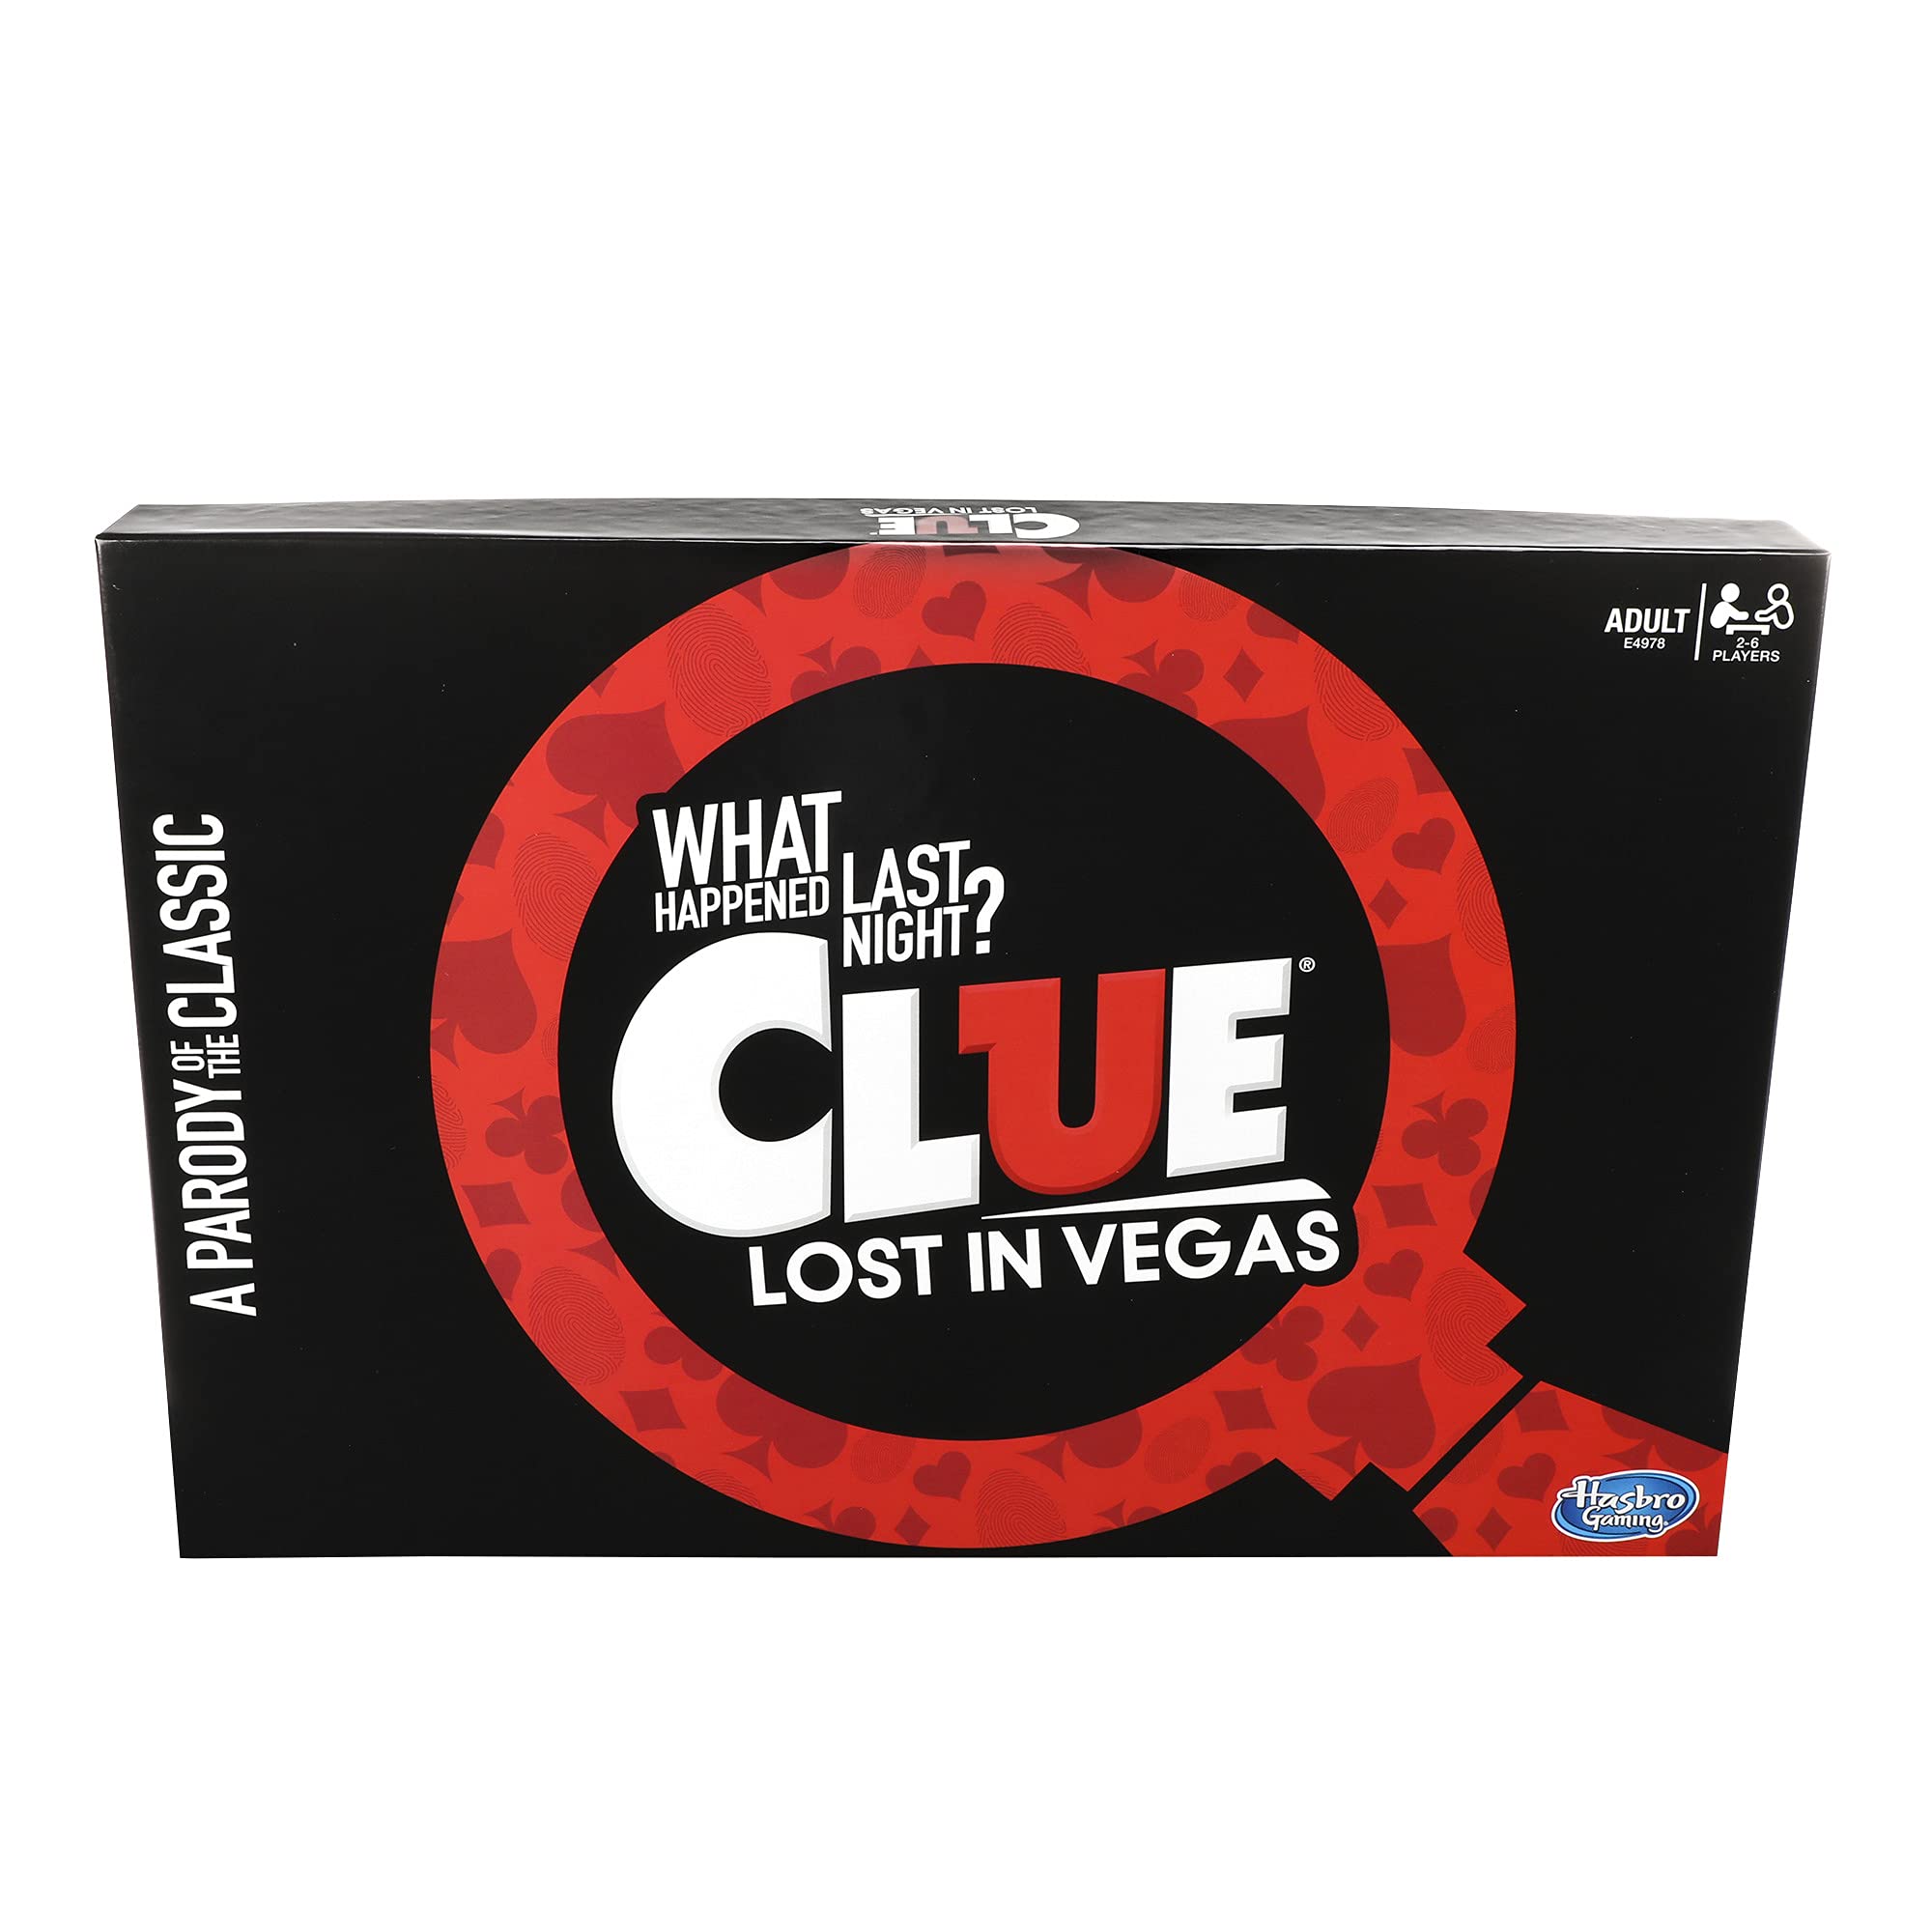 Clue Lost in Vegas Board Game The Classic Whodunnit Parody Mystery Game